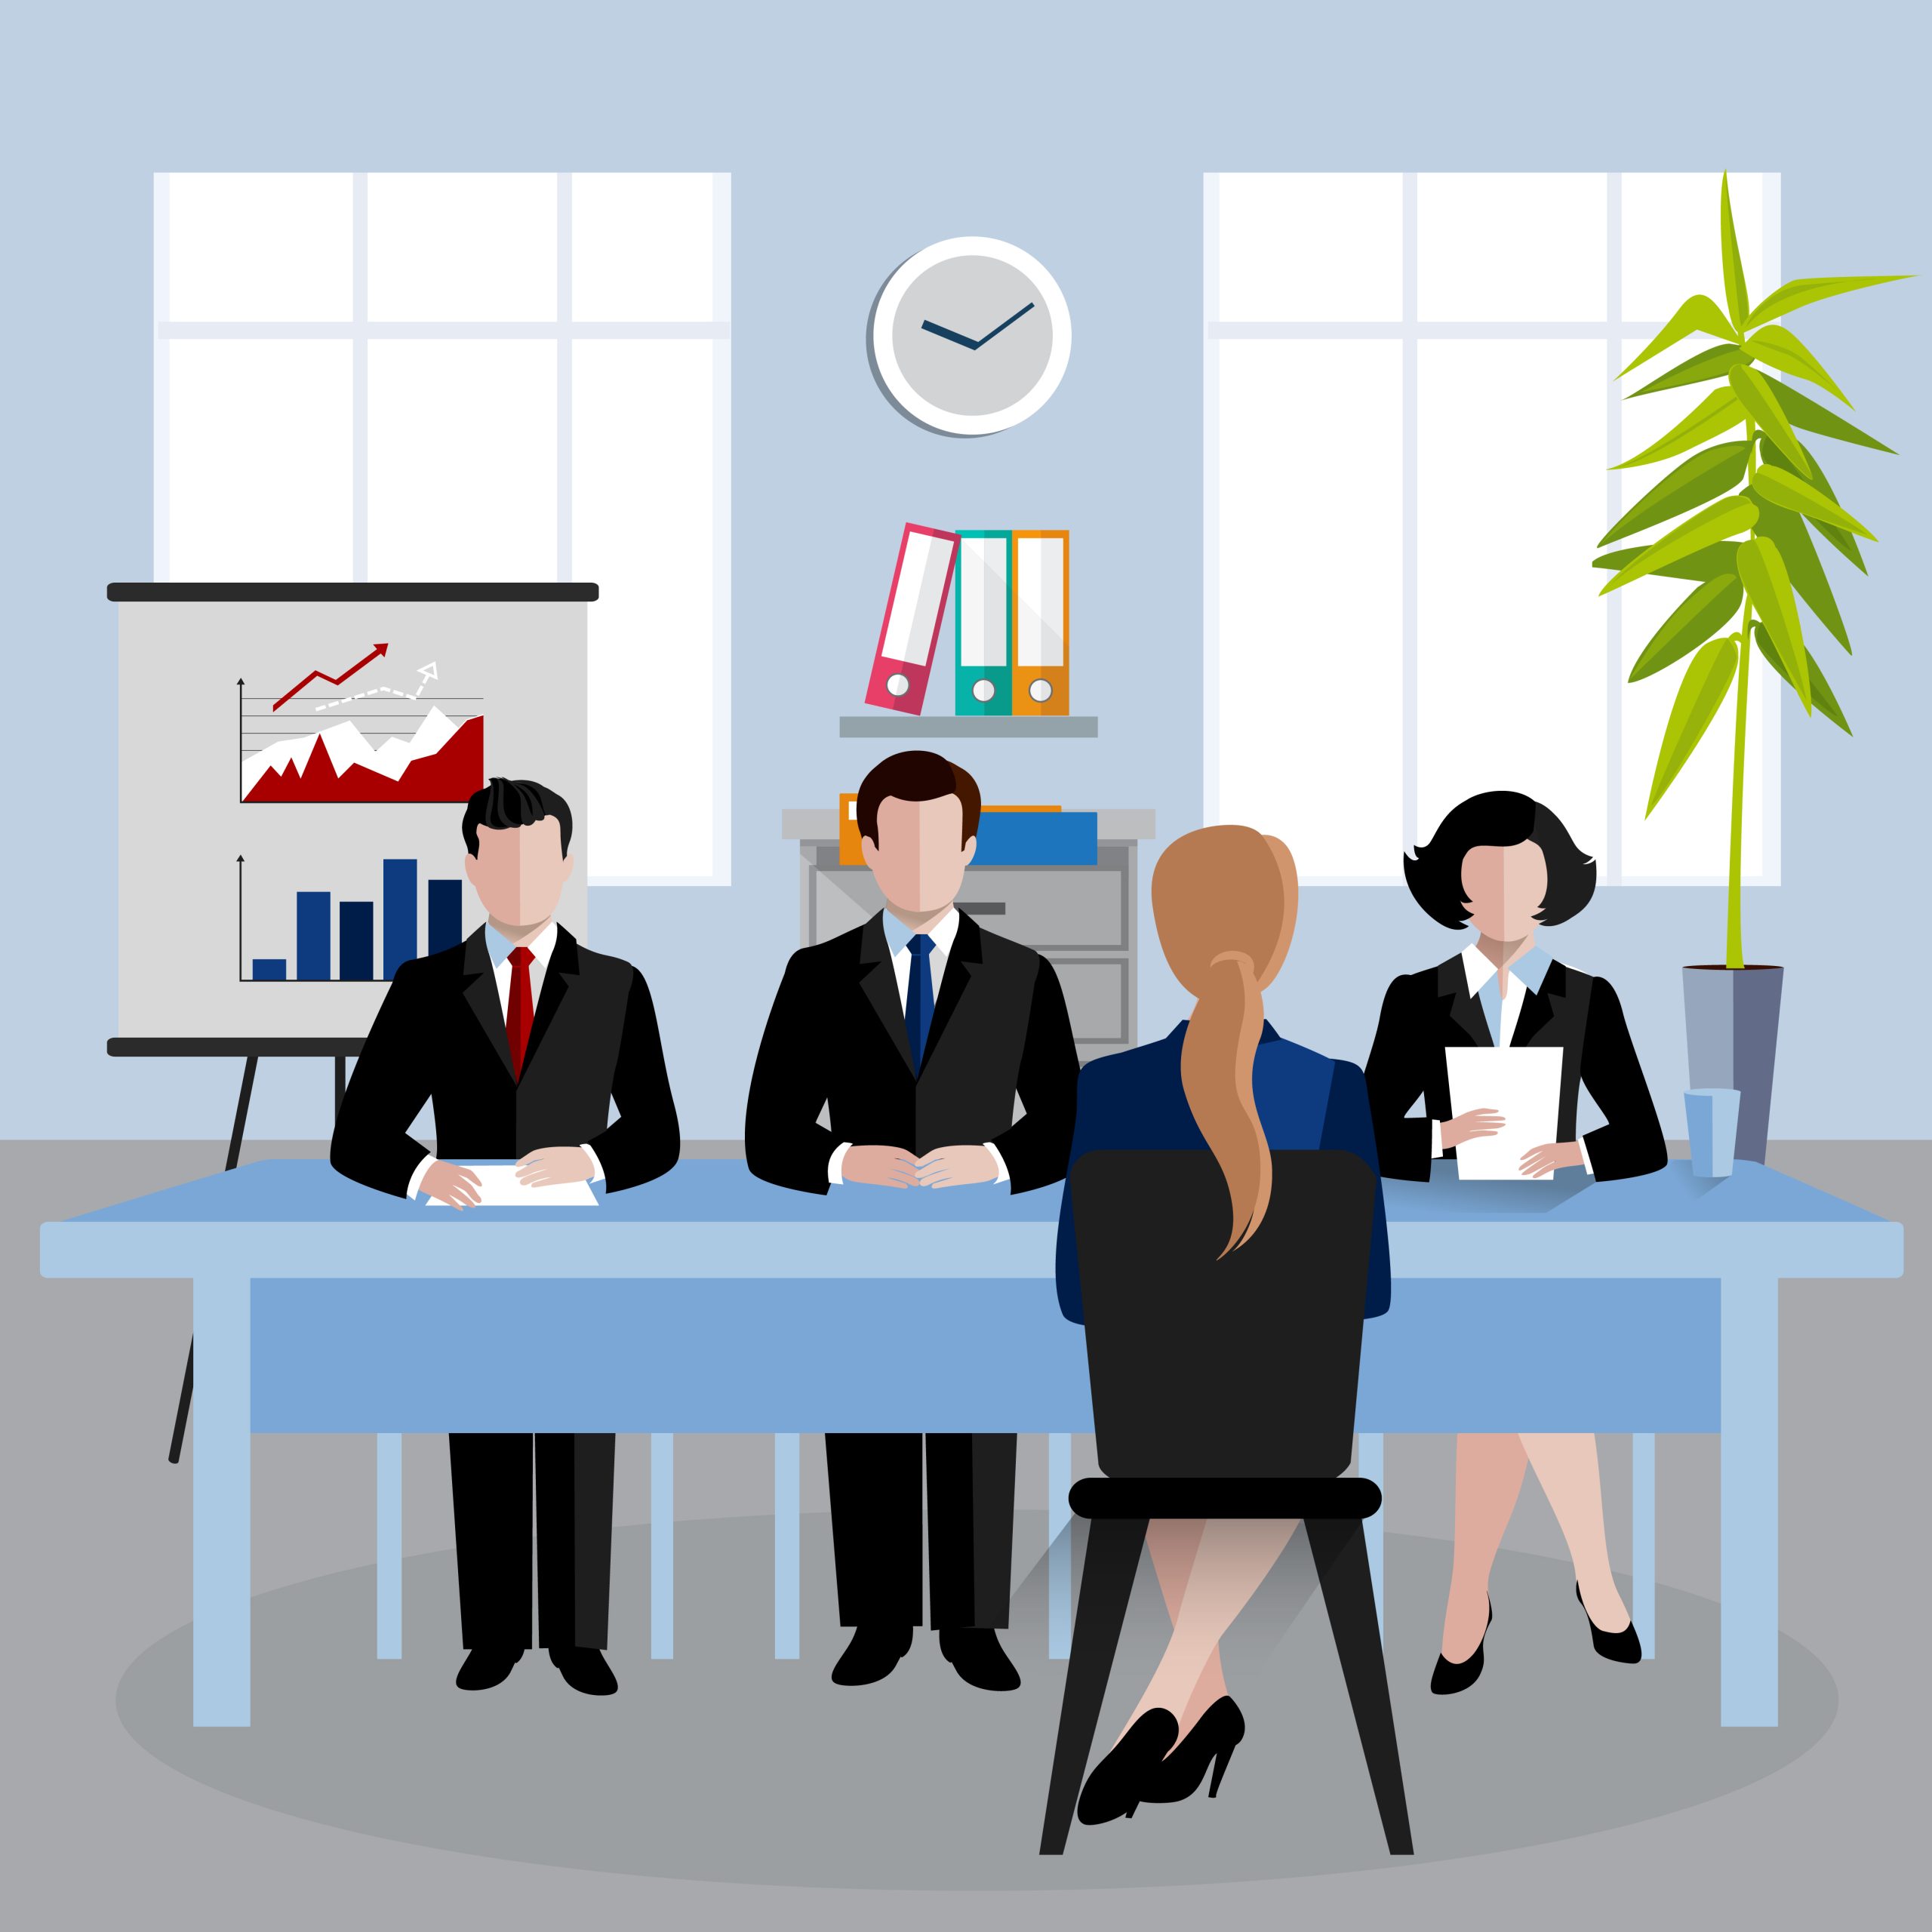 Human resources at business meeting in office flat background vector illustration